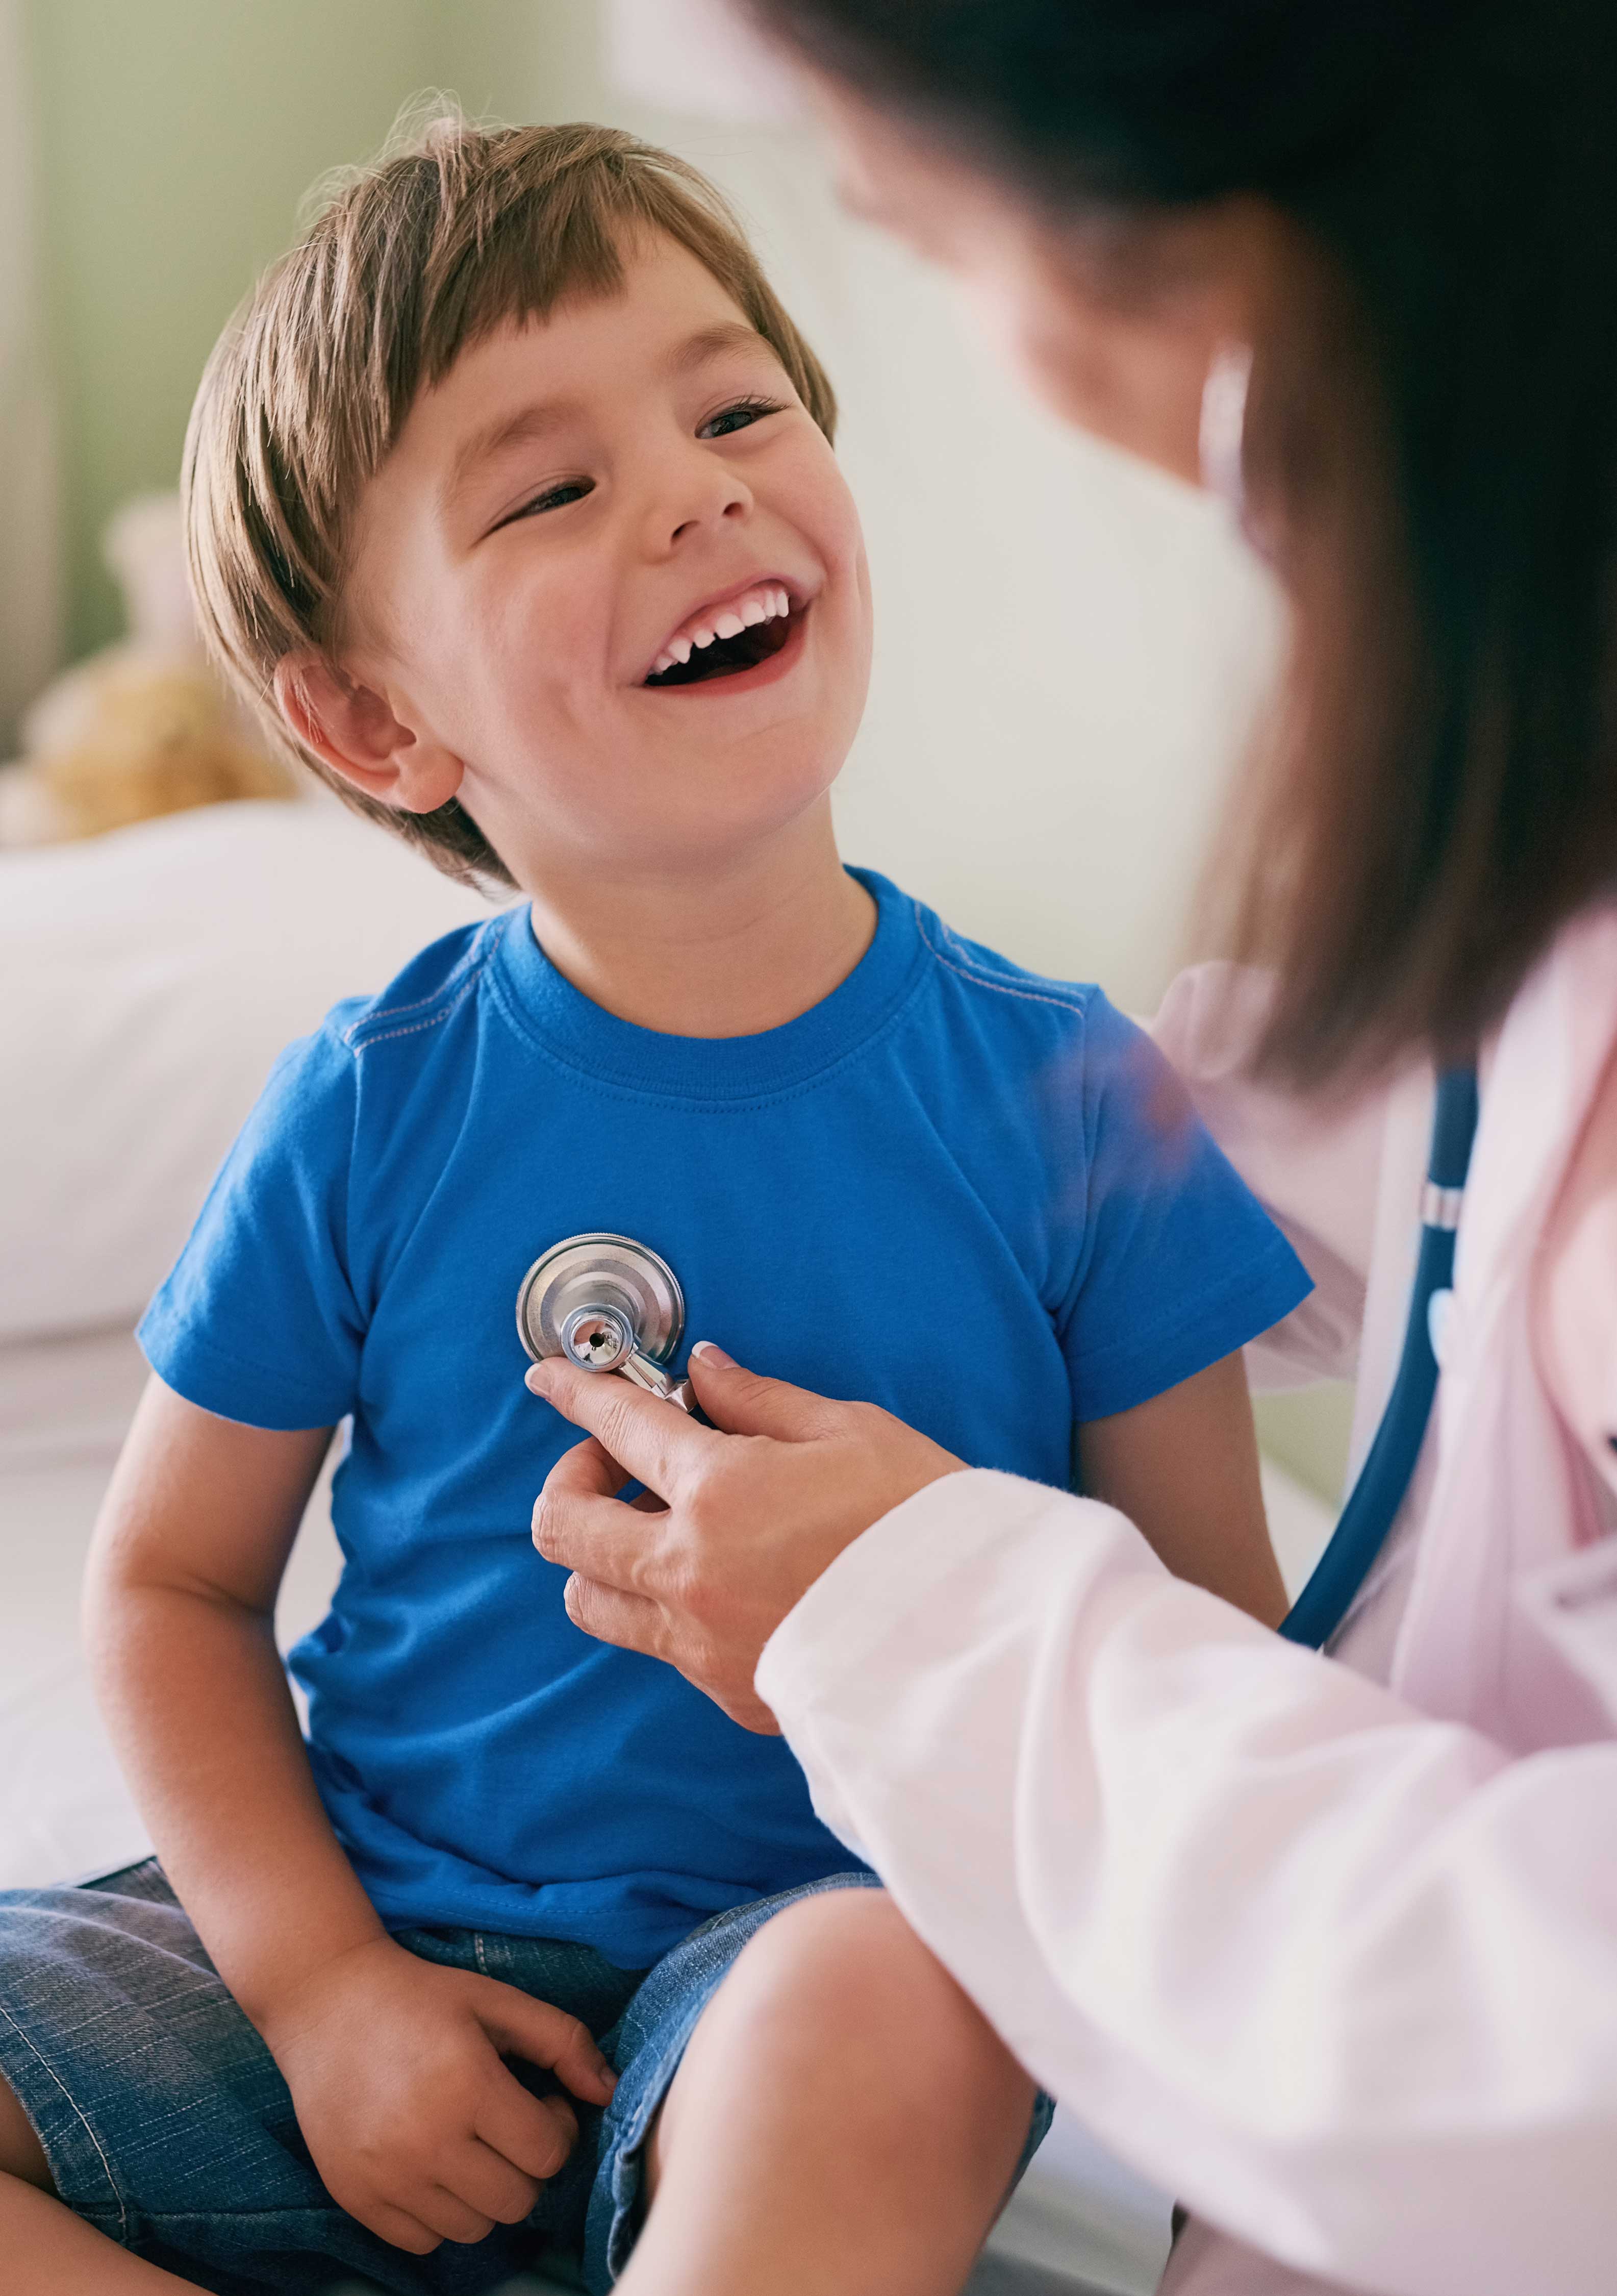 Doctor examining pediatric patient's heart with a stethoscope